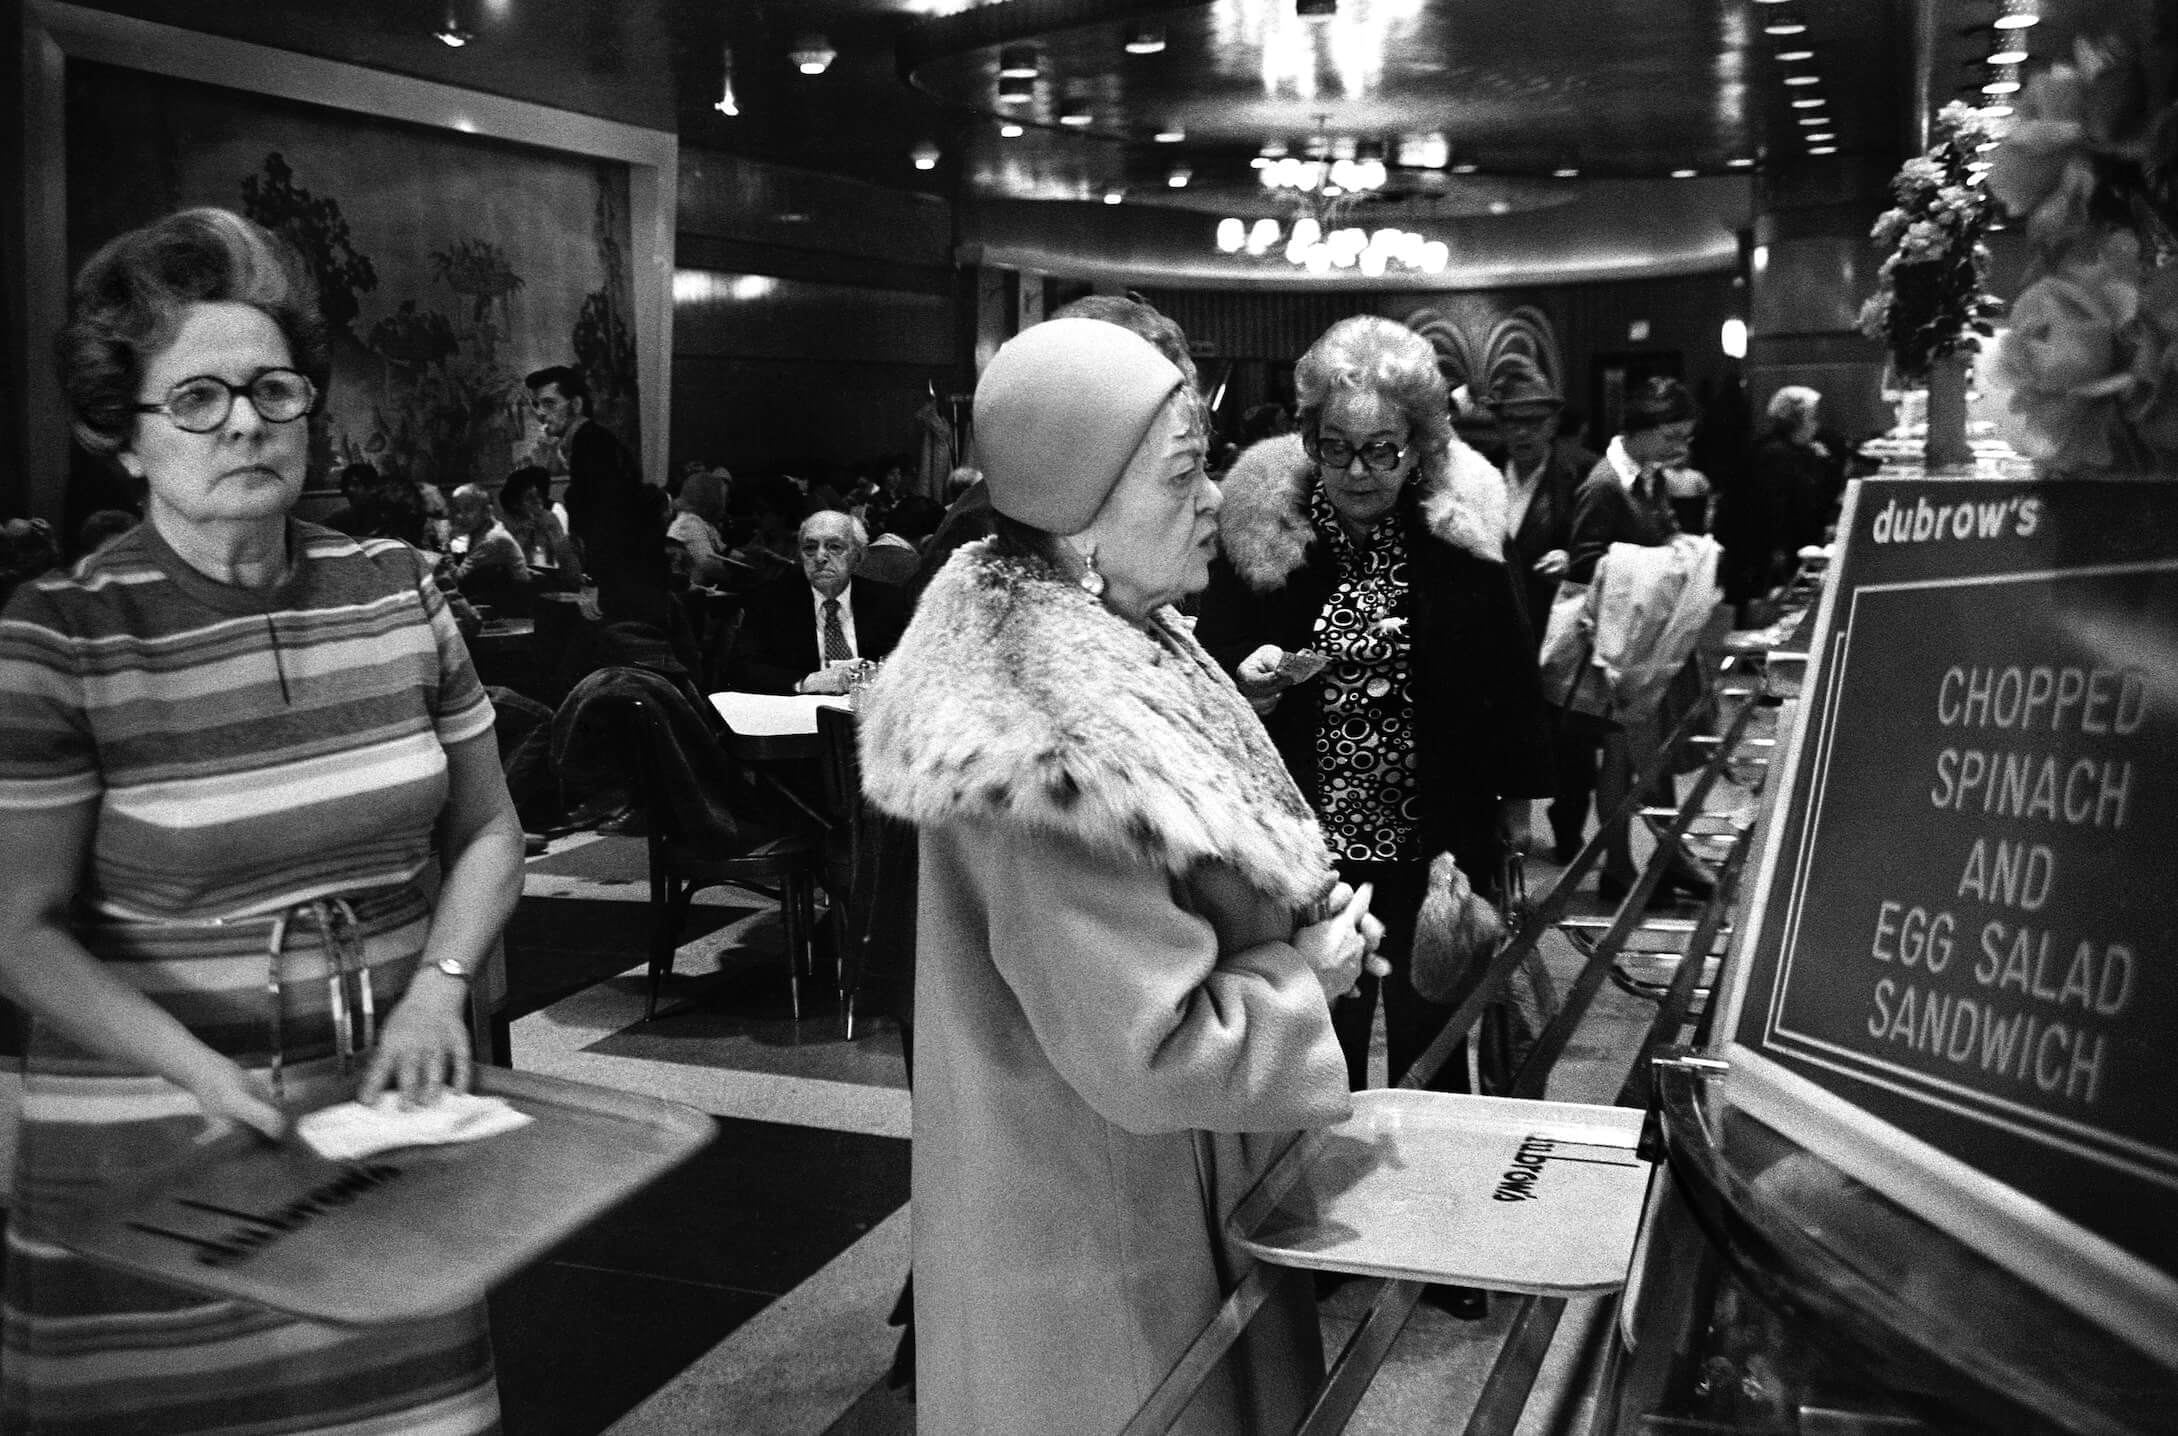 A woman dressed in a formal coat and cloche hat examines the menu at Dubrow's Cafeteria.